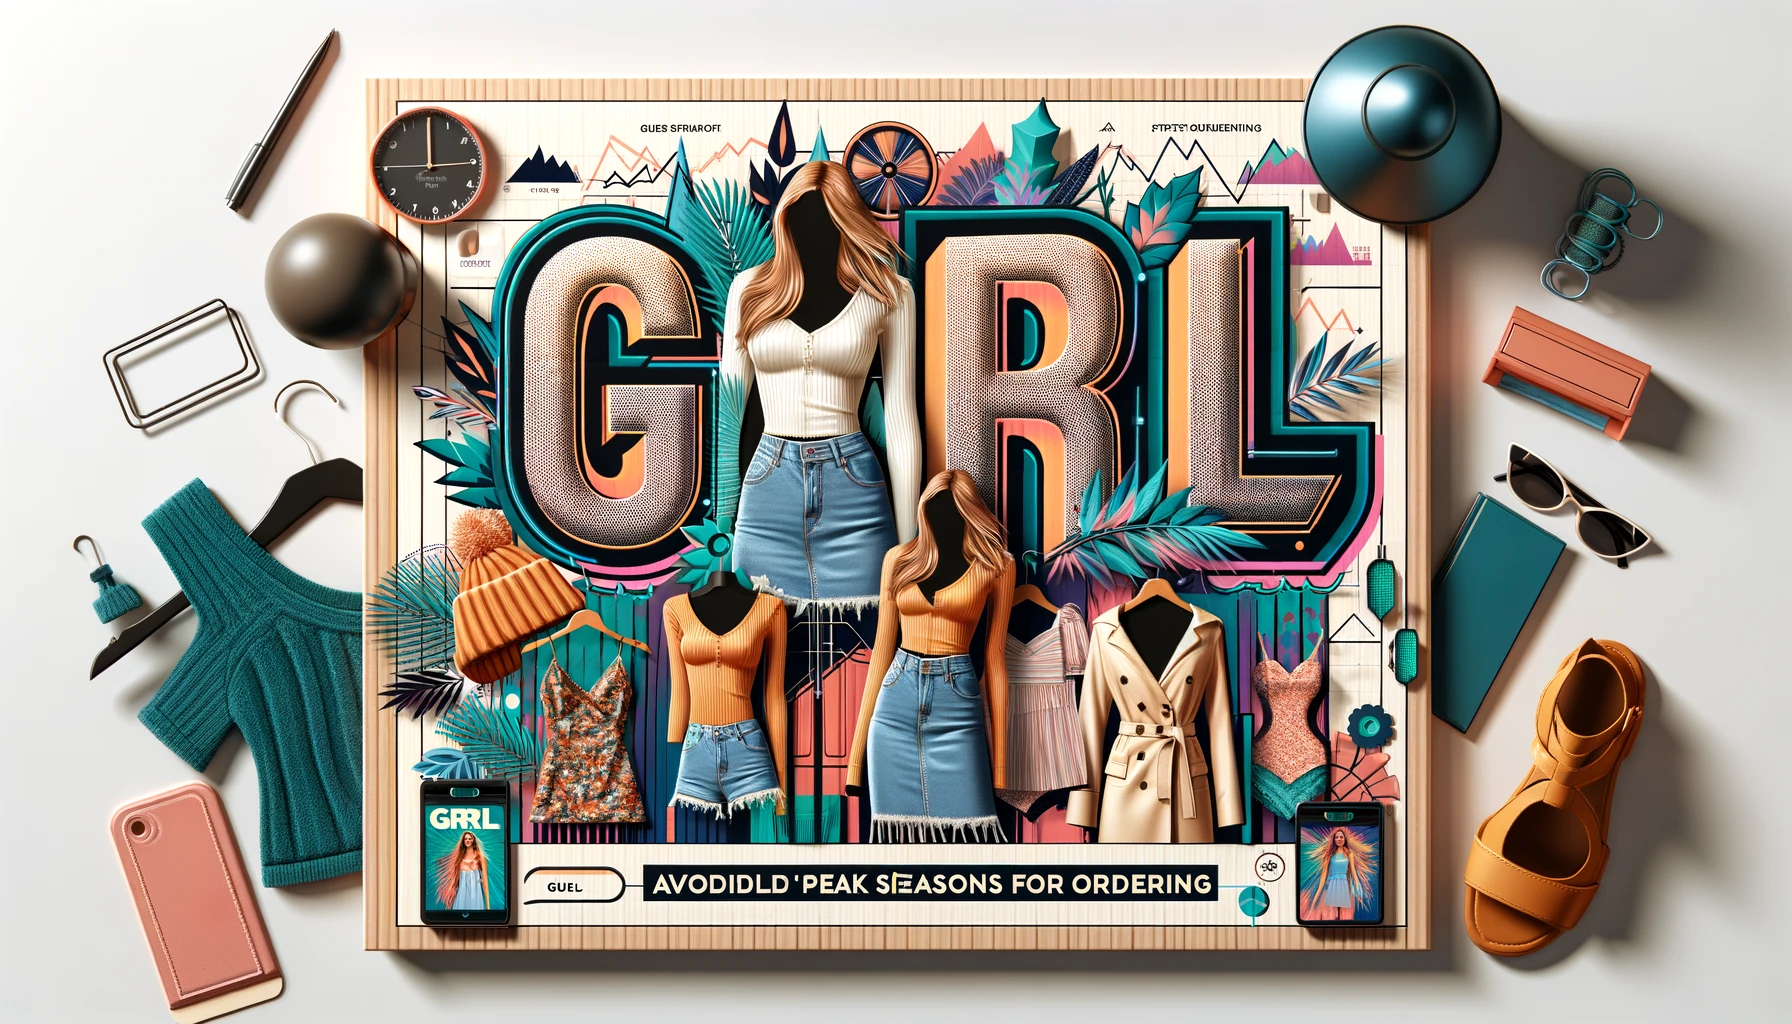 A stylish layout for a women's budget fashion brand named 'GRL' with a focus on avoiding peak seasons for ordering. The image features trendy and affordable clothing items displayed attractively, with visual elements representing strategies to avoid peak seasons when ordering. Incorporate the word 'GRL' prominently in the design. The background should be vibrant and fashionable, reflecting the brand's appeal to young women. The image should be in a 16:9 aspect ratio.